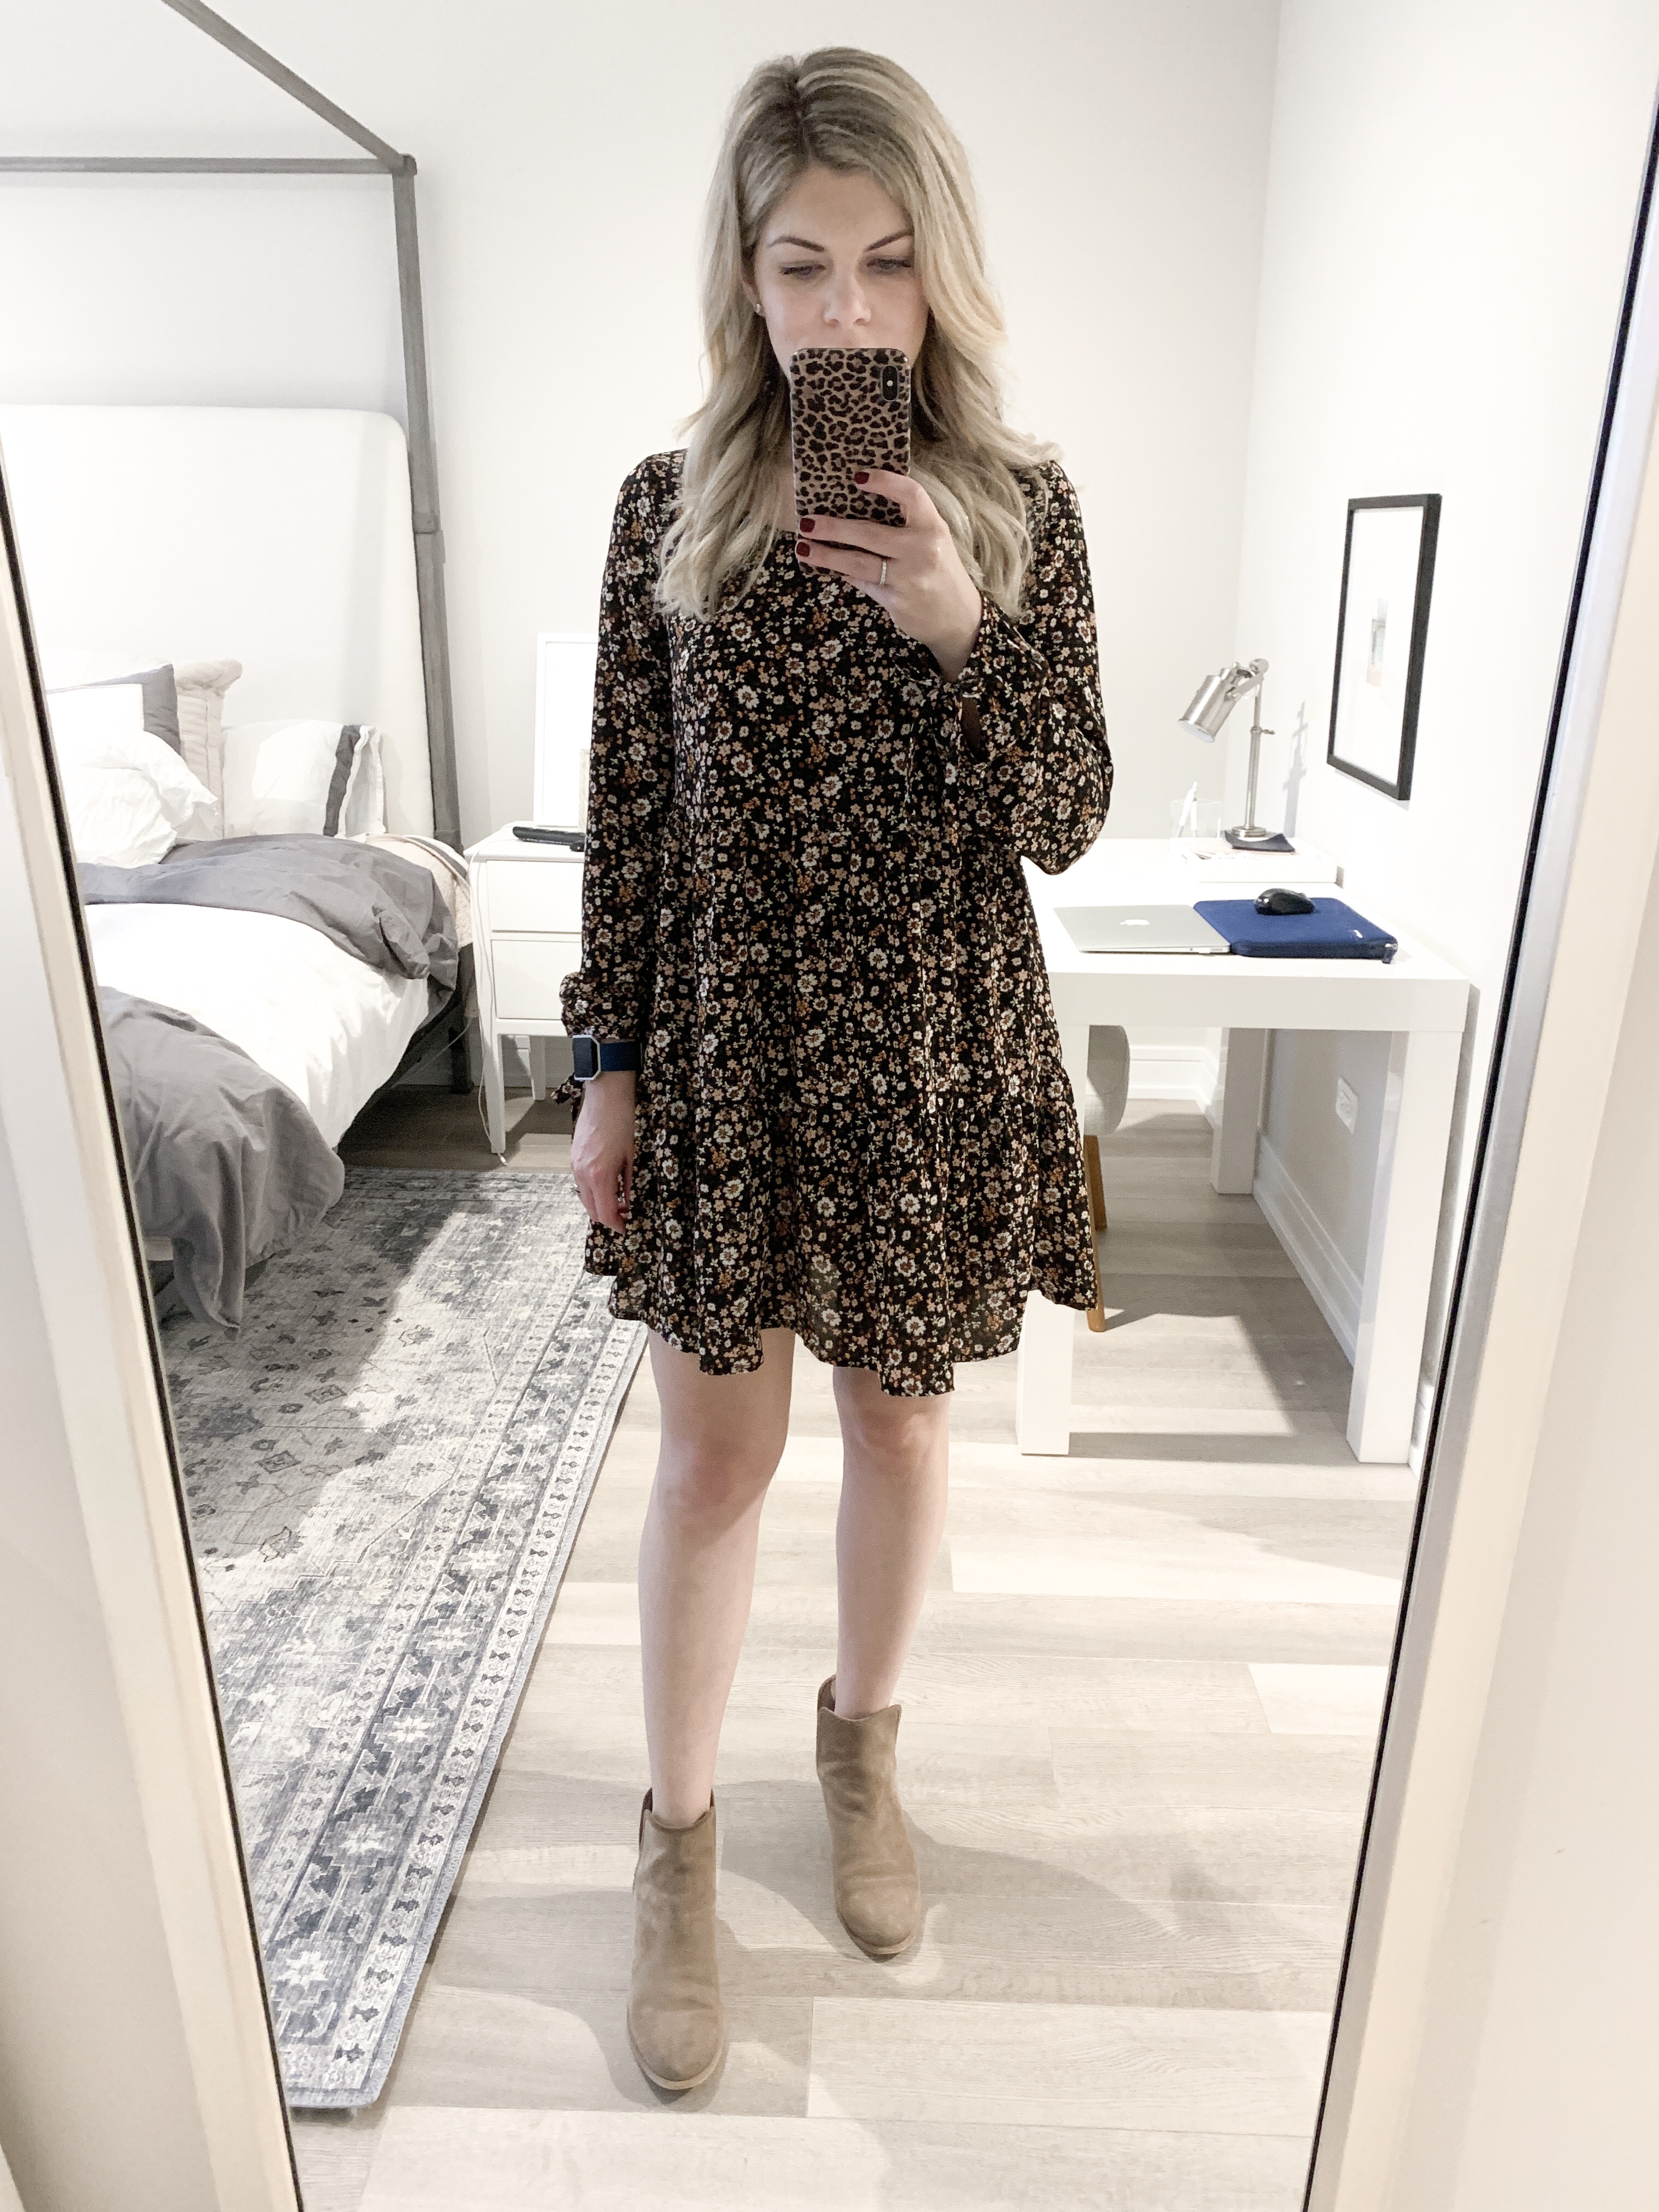 floral dress for fall